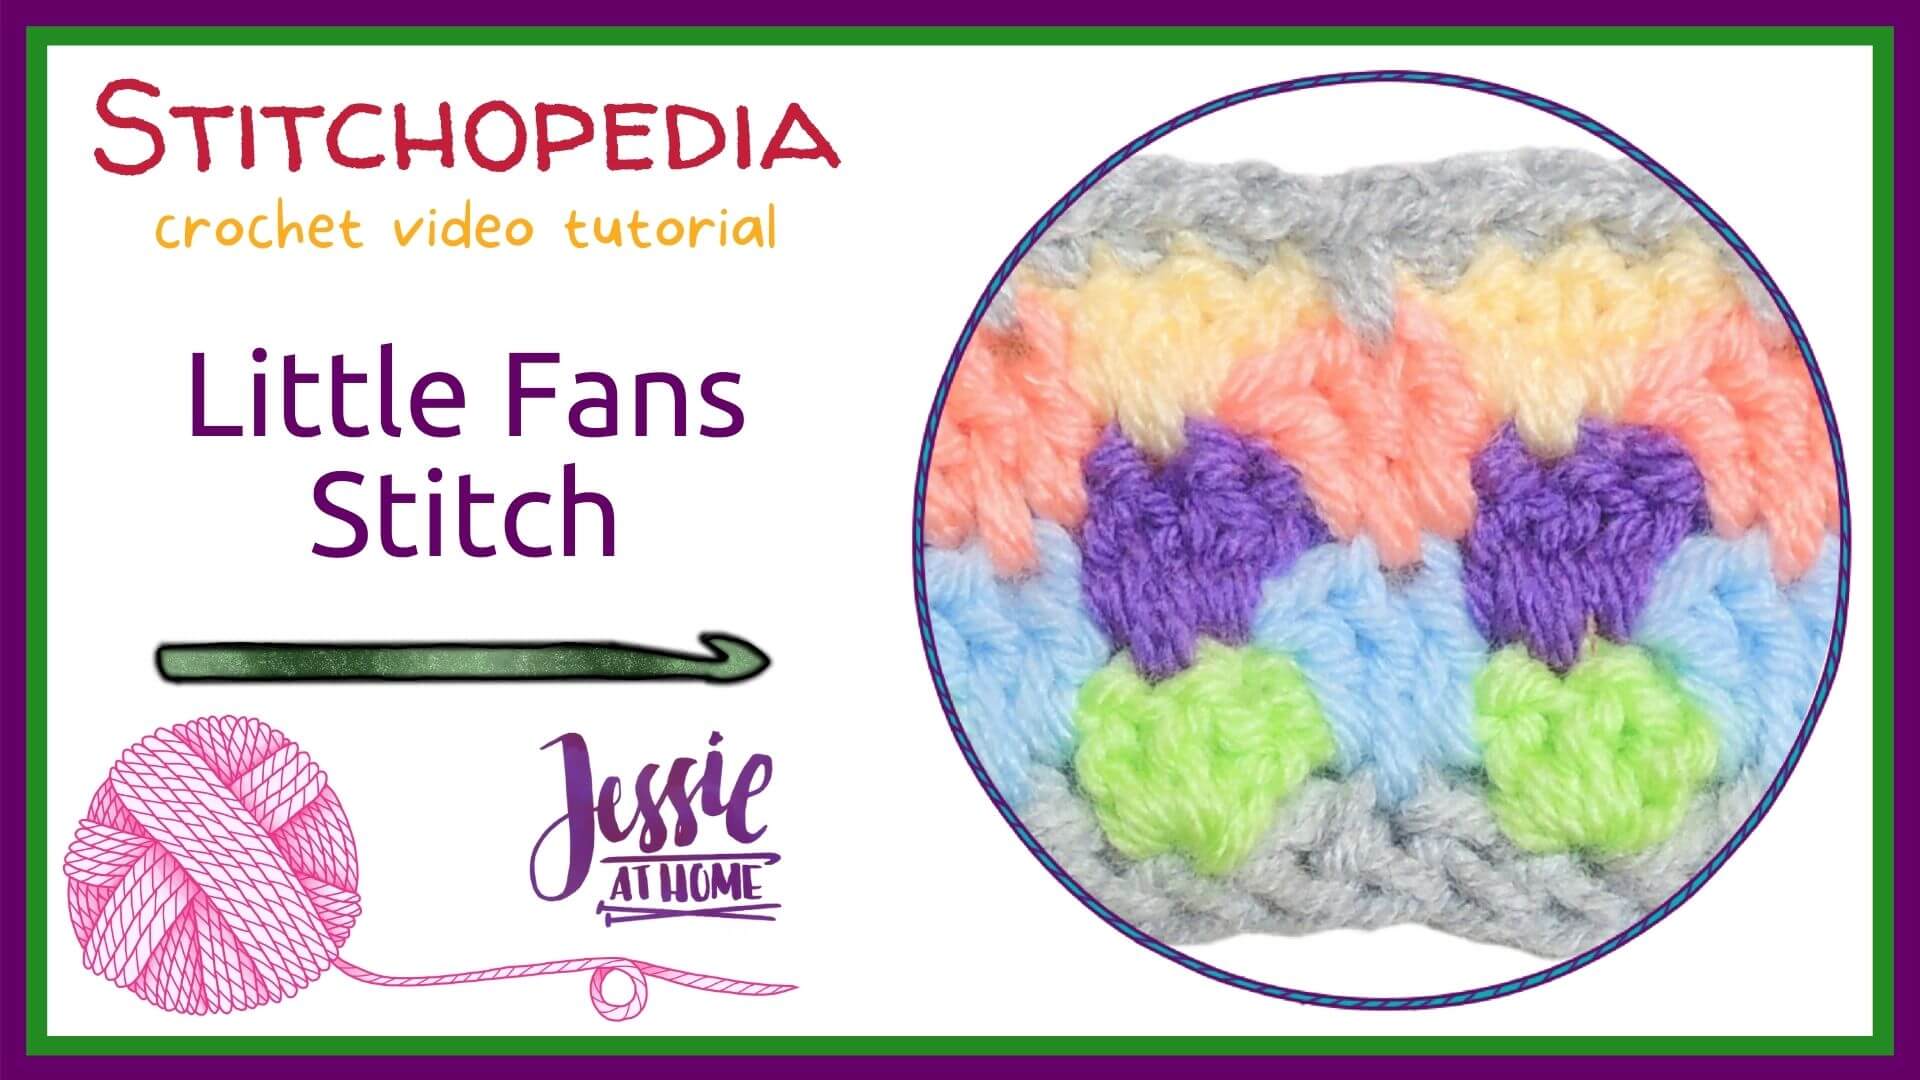 White background with text that reads "Stitchopedia, crochet video tutorial, Little fans stitch" and "Jessie At Home". A round image on the right of crochet.